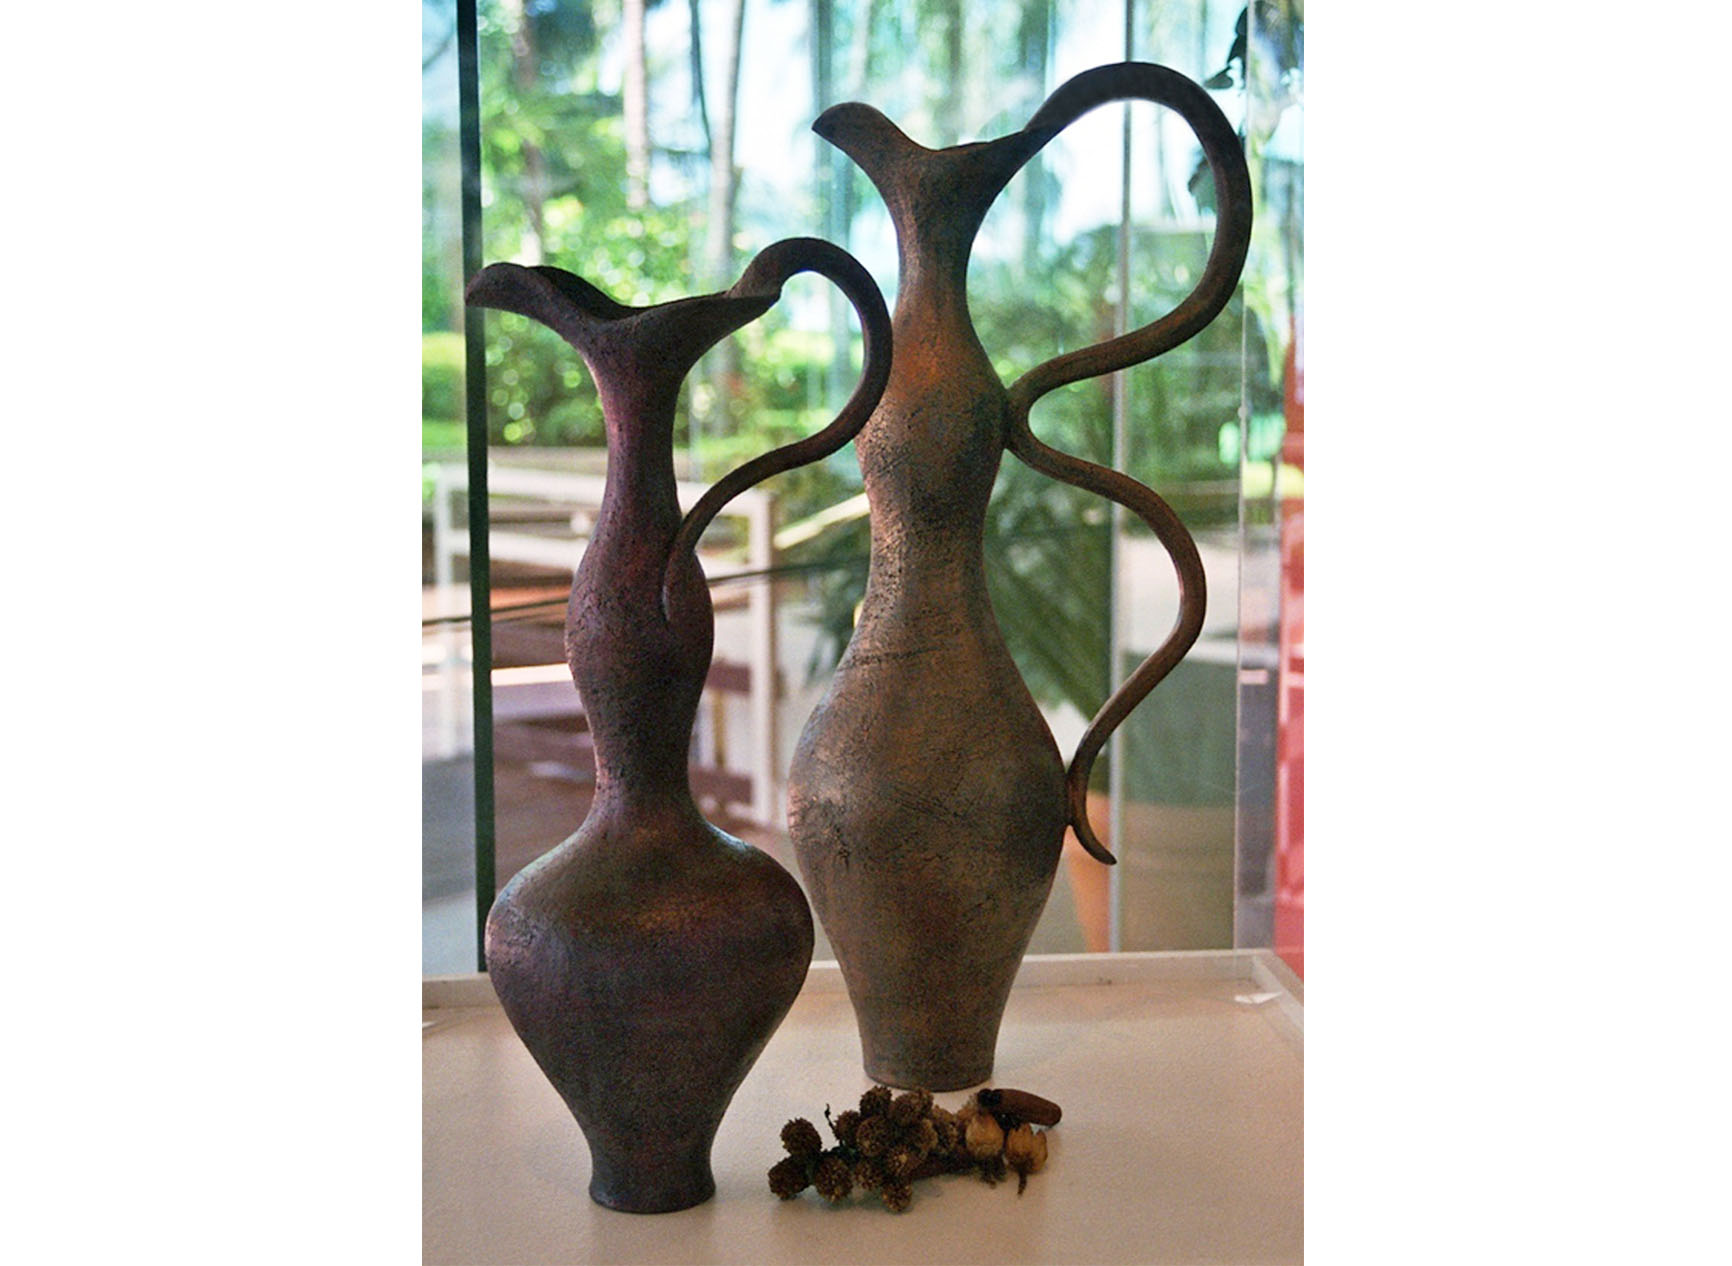 Two very curvacious female form vases in a glass case in The Hilton Hotel, Cairns